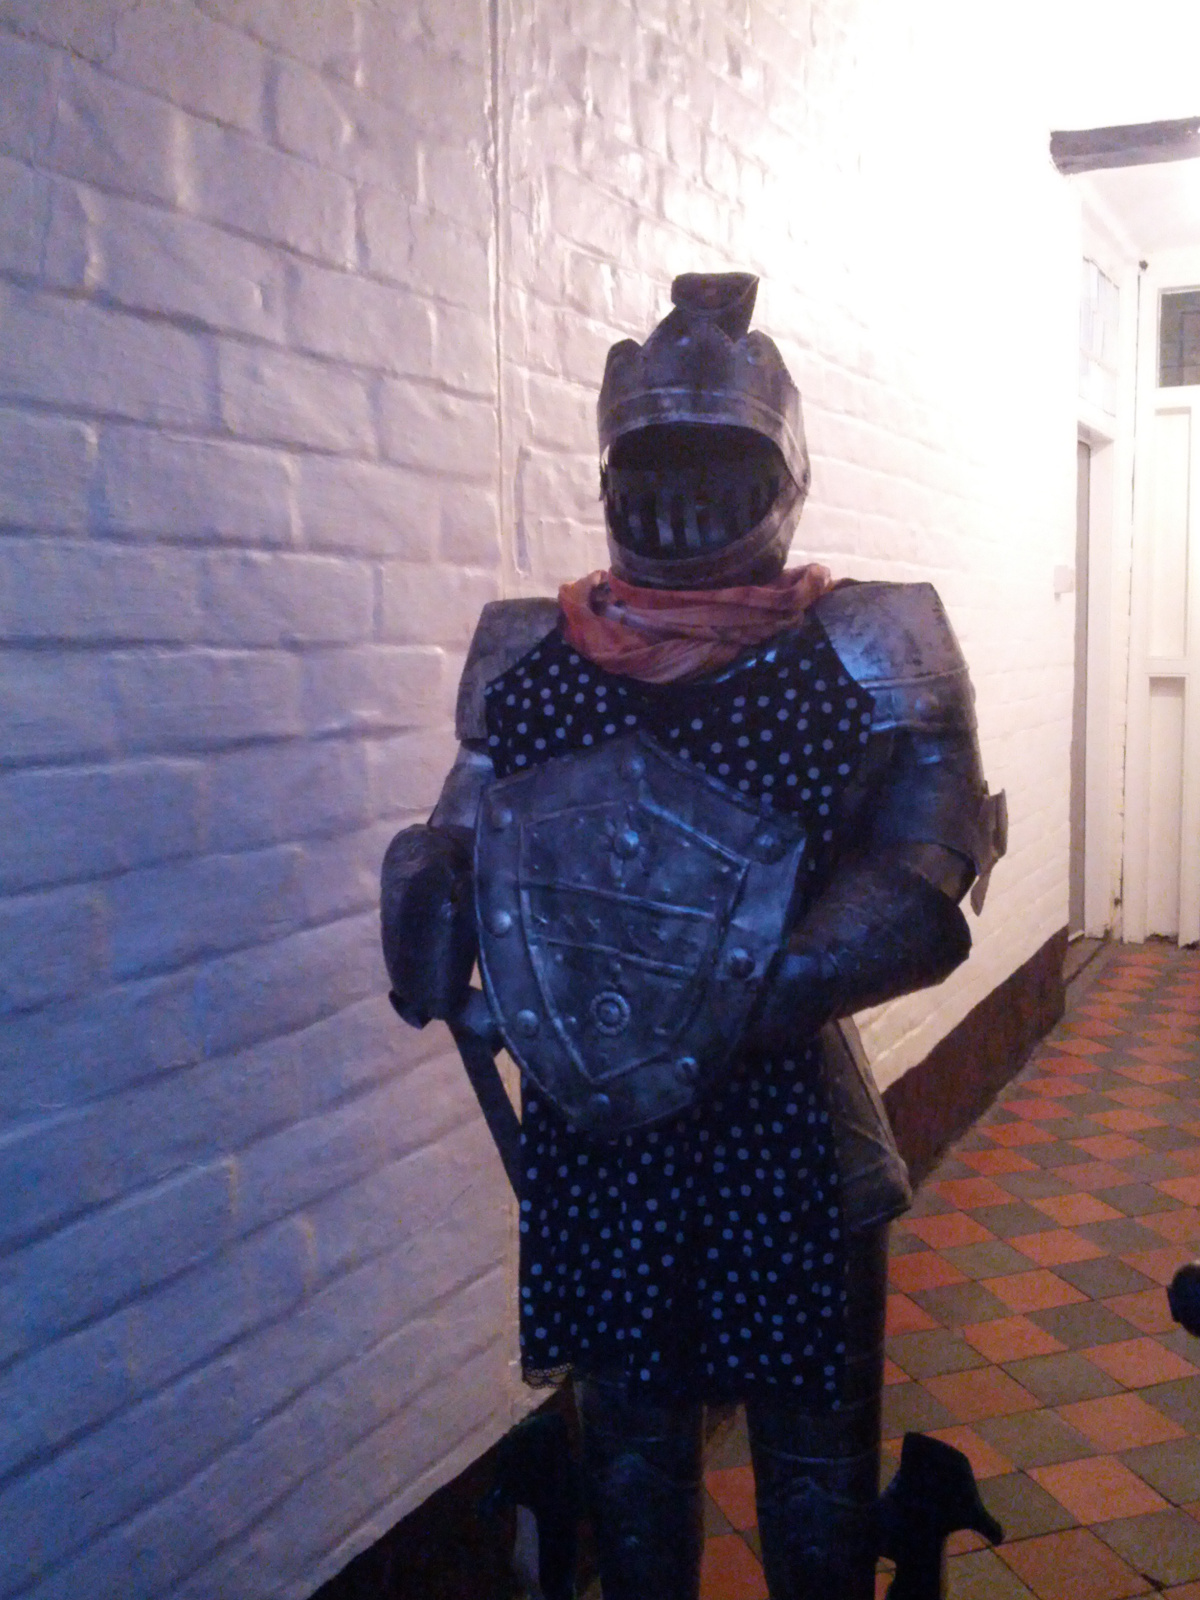 A suit of armour, wearing a dress, standing in a passageway